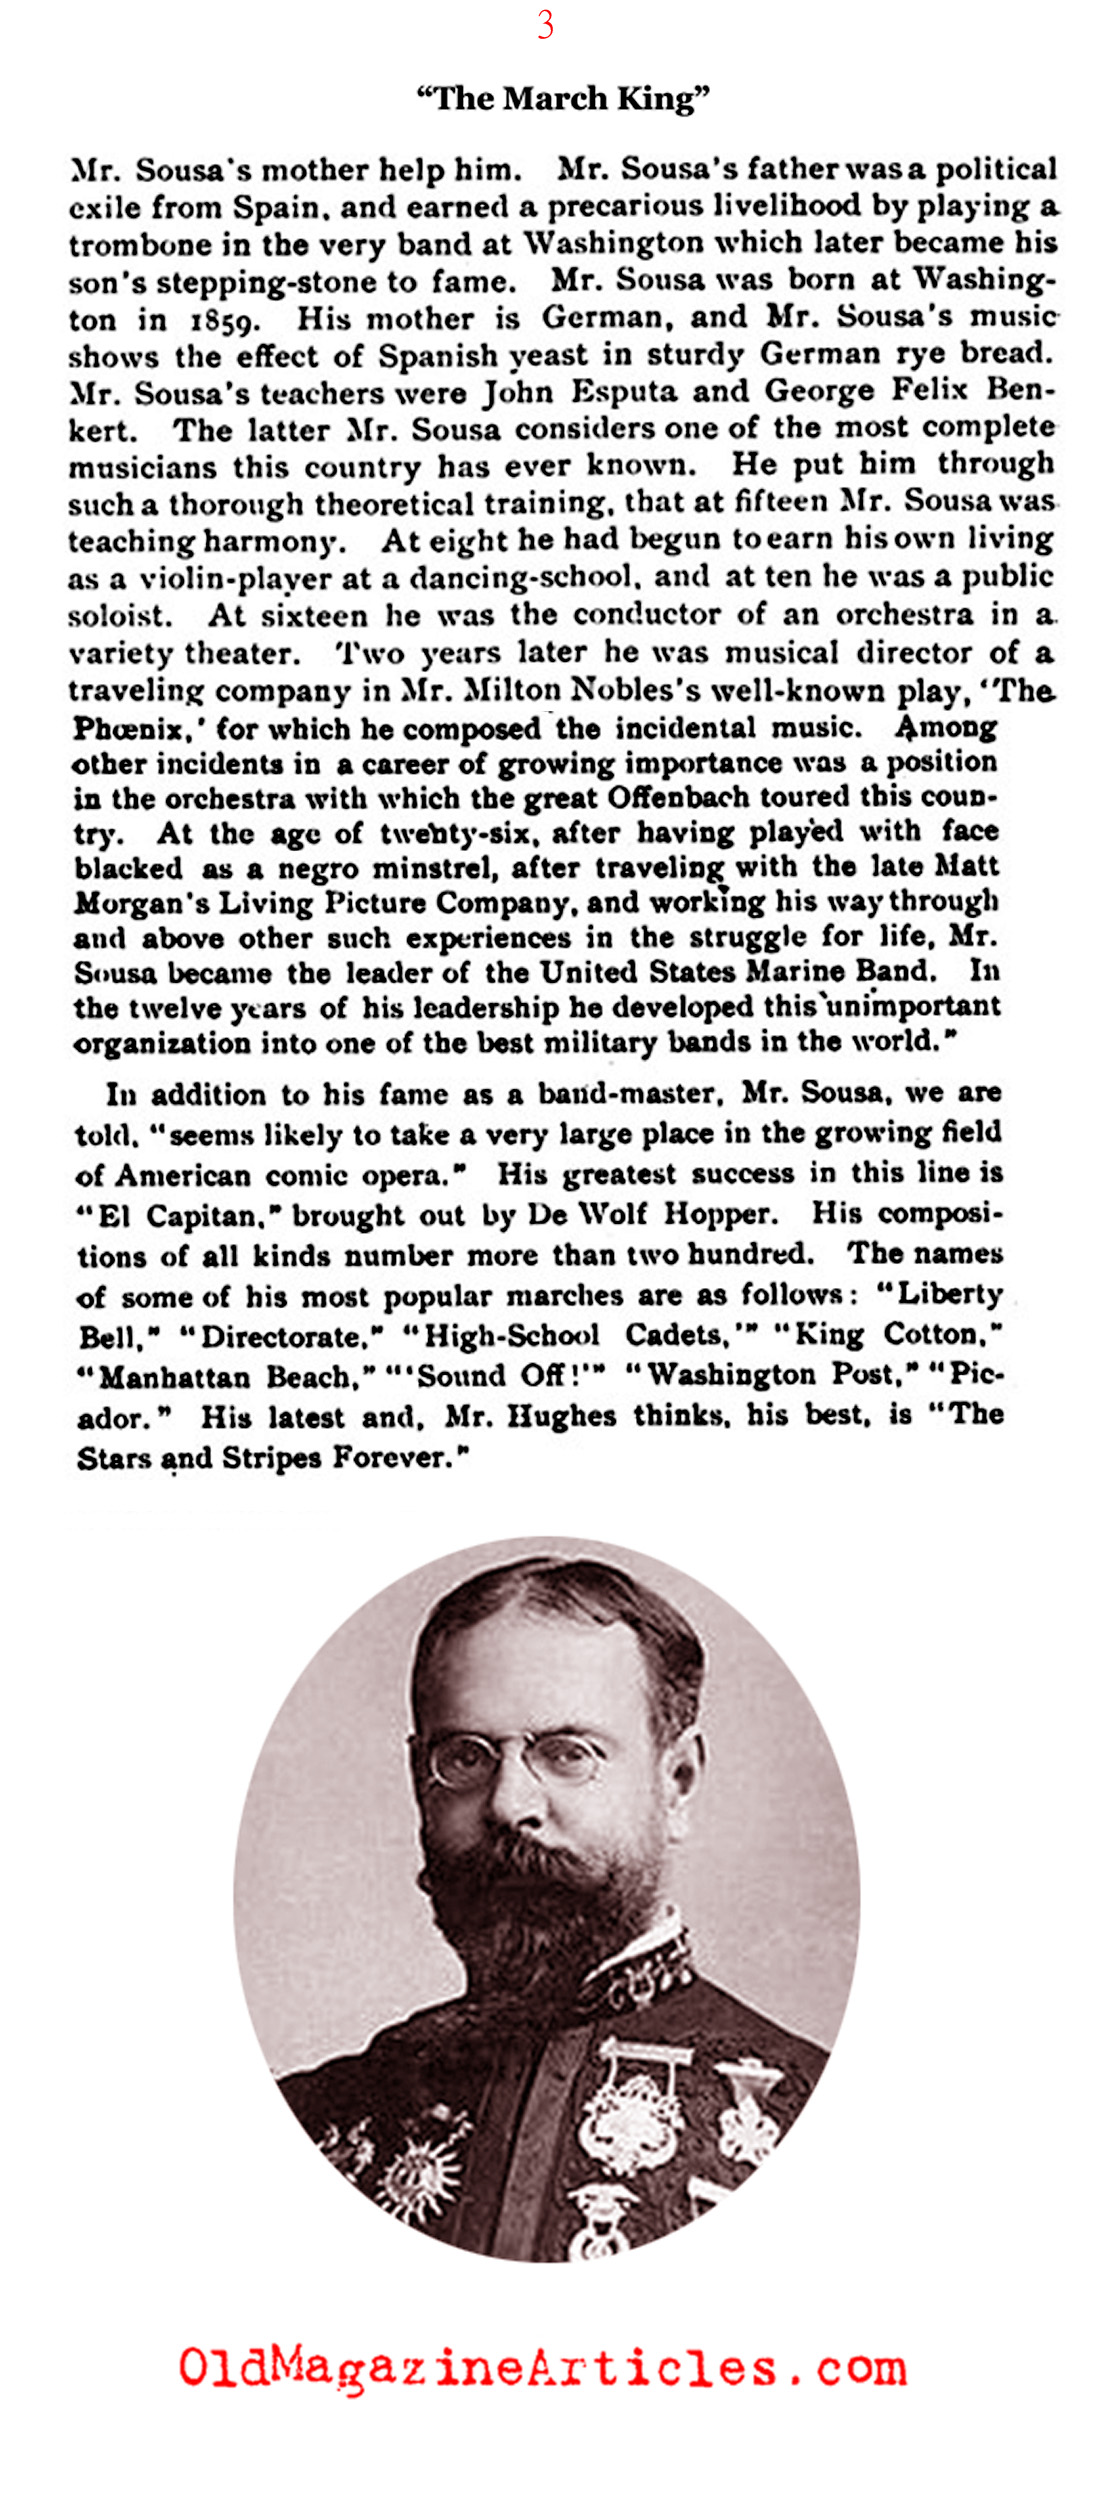 John Philip Sousa: The March King (The Literary Digest, 1897)